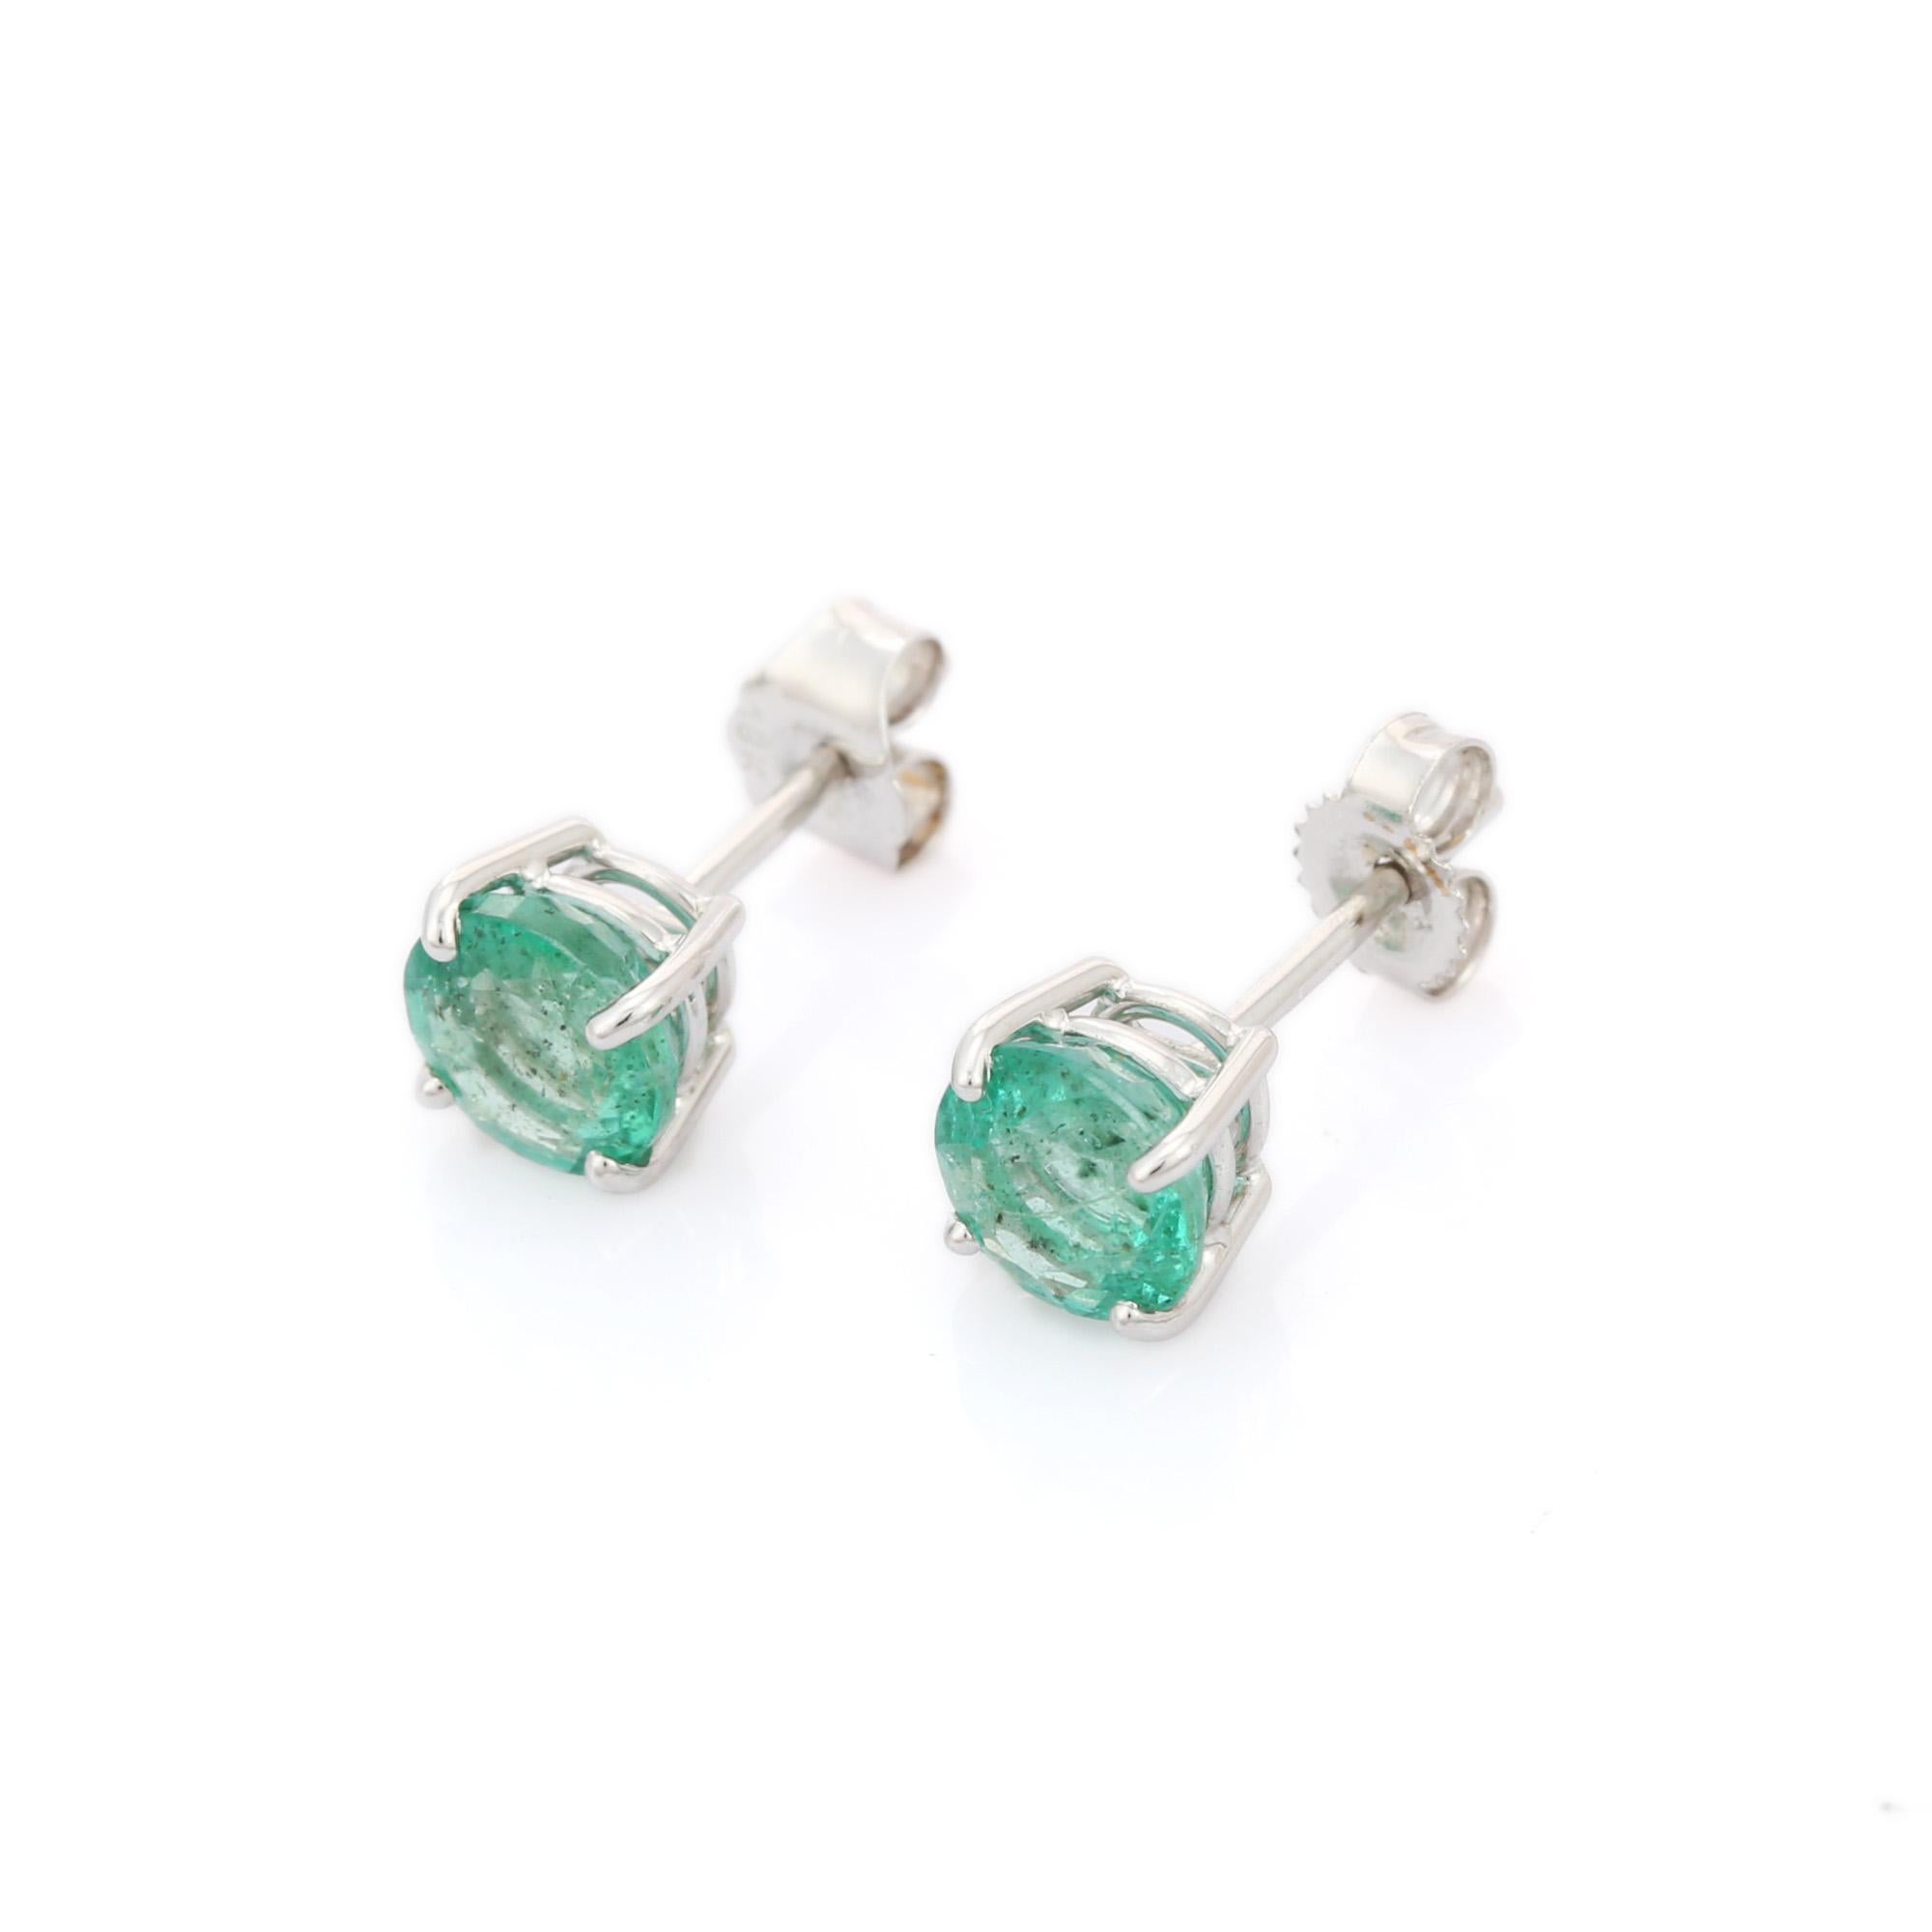 Earrings create a subtle beauty while showcasing the colors of the natural precious gemstones  making a statement.

Round cut Emerald Stud earrings in 18K gold. Embrace your look with these stunning pair of earrings suitable for any occasion to